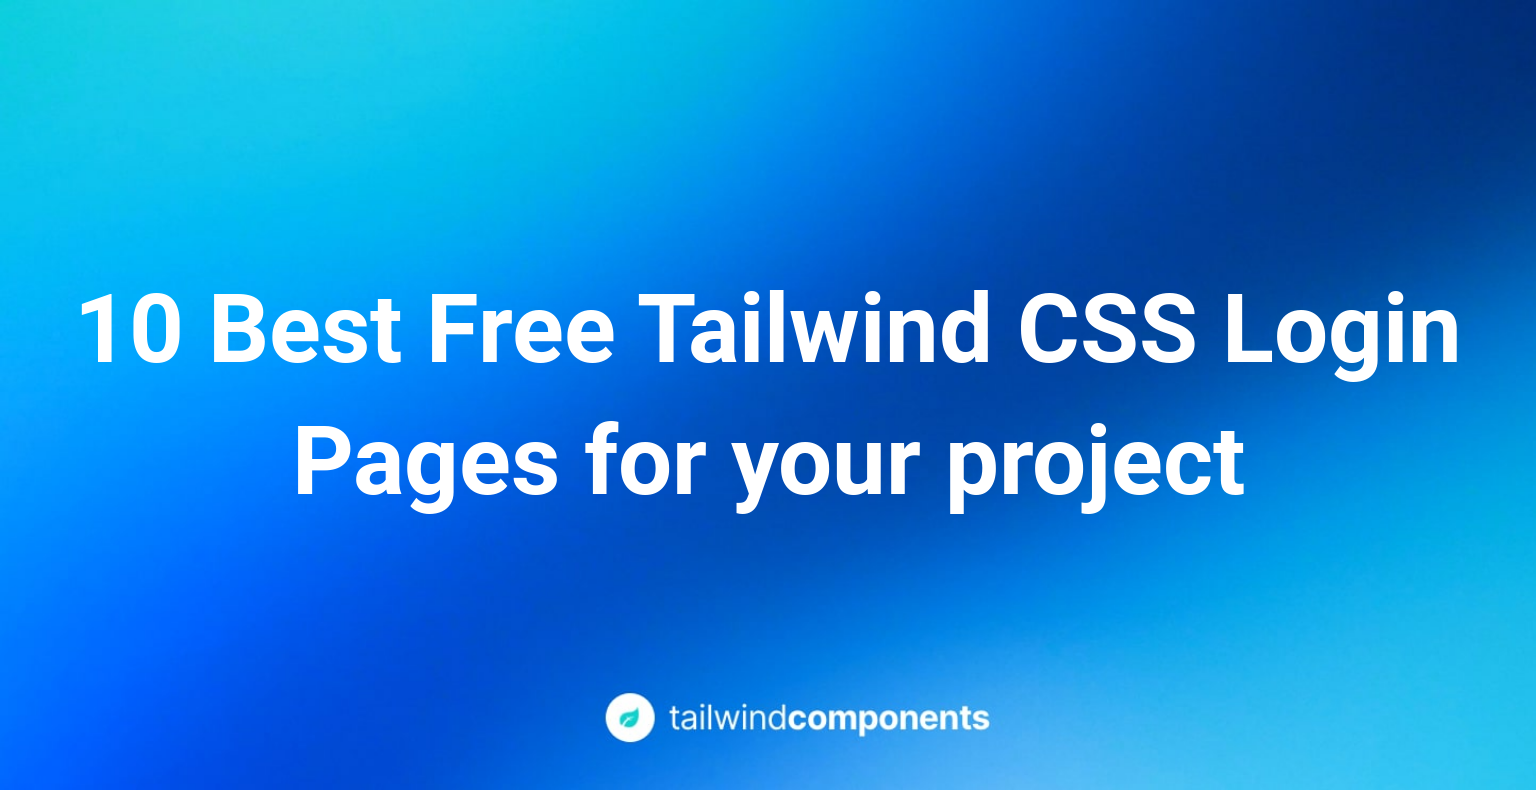 10 Best Free Tailwind CSS Login Pages for your project Image